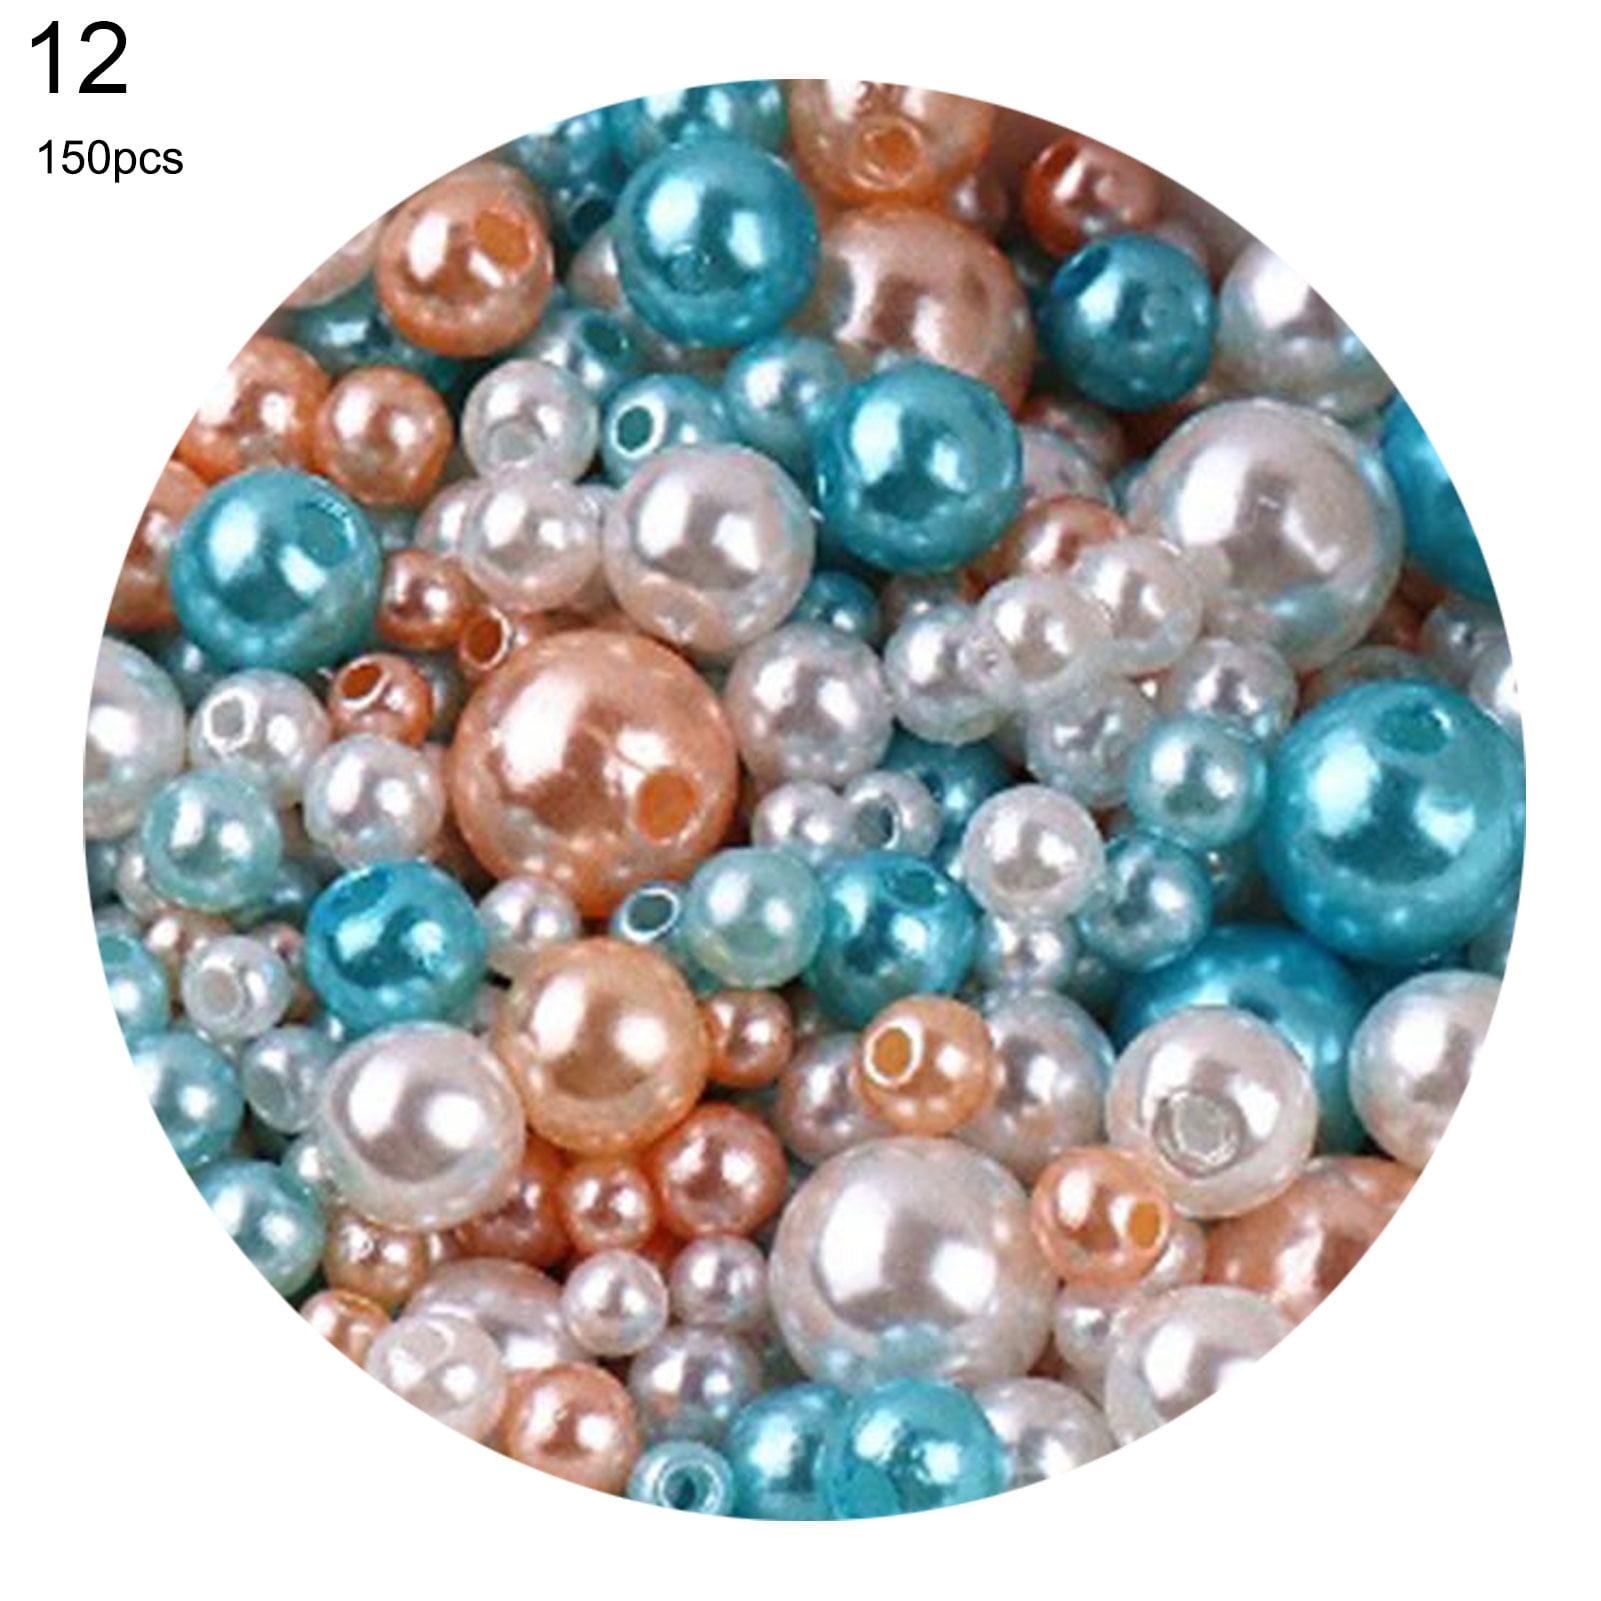 TEHAUX 50pcs Pearl Accessories Earring Pearl Charms Beads for Crafts  Artificial Pearl Beads Safety Pin Earring Pearls Pearl Earring Charms Faux  Pearl